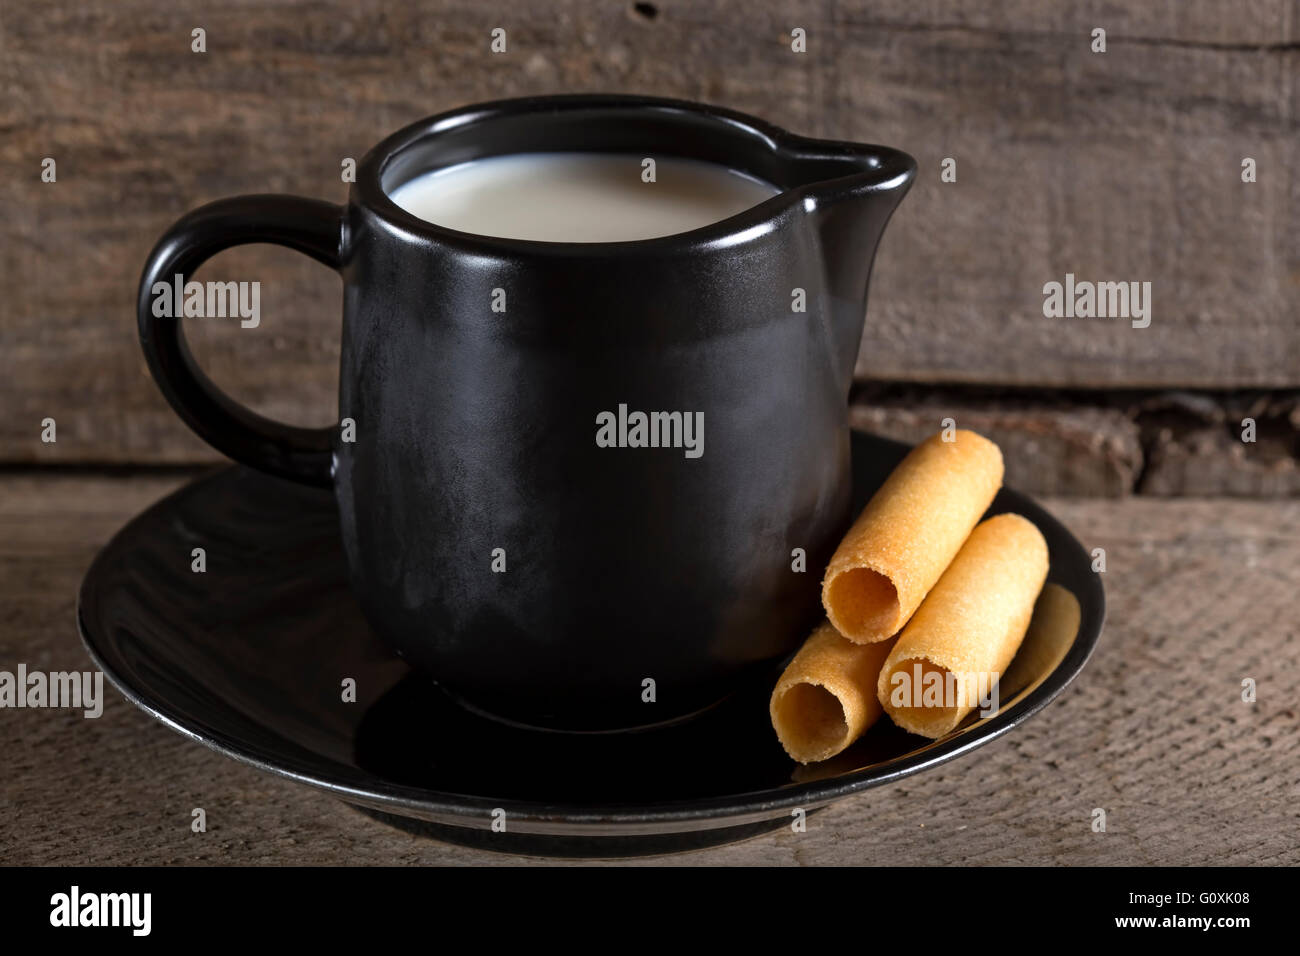 Milk cup with sweet corn rolls on plate with wooden background Stock Photo